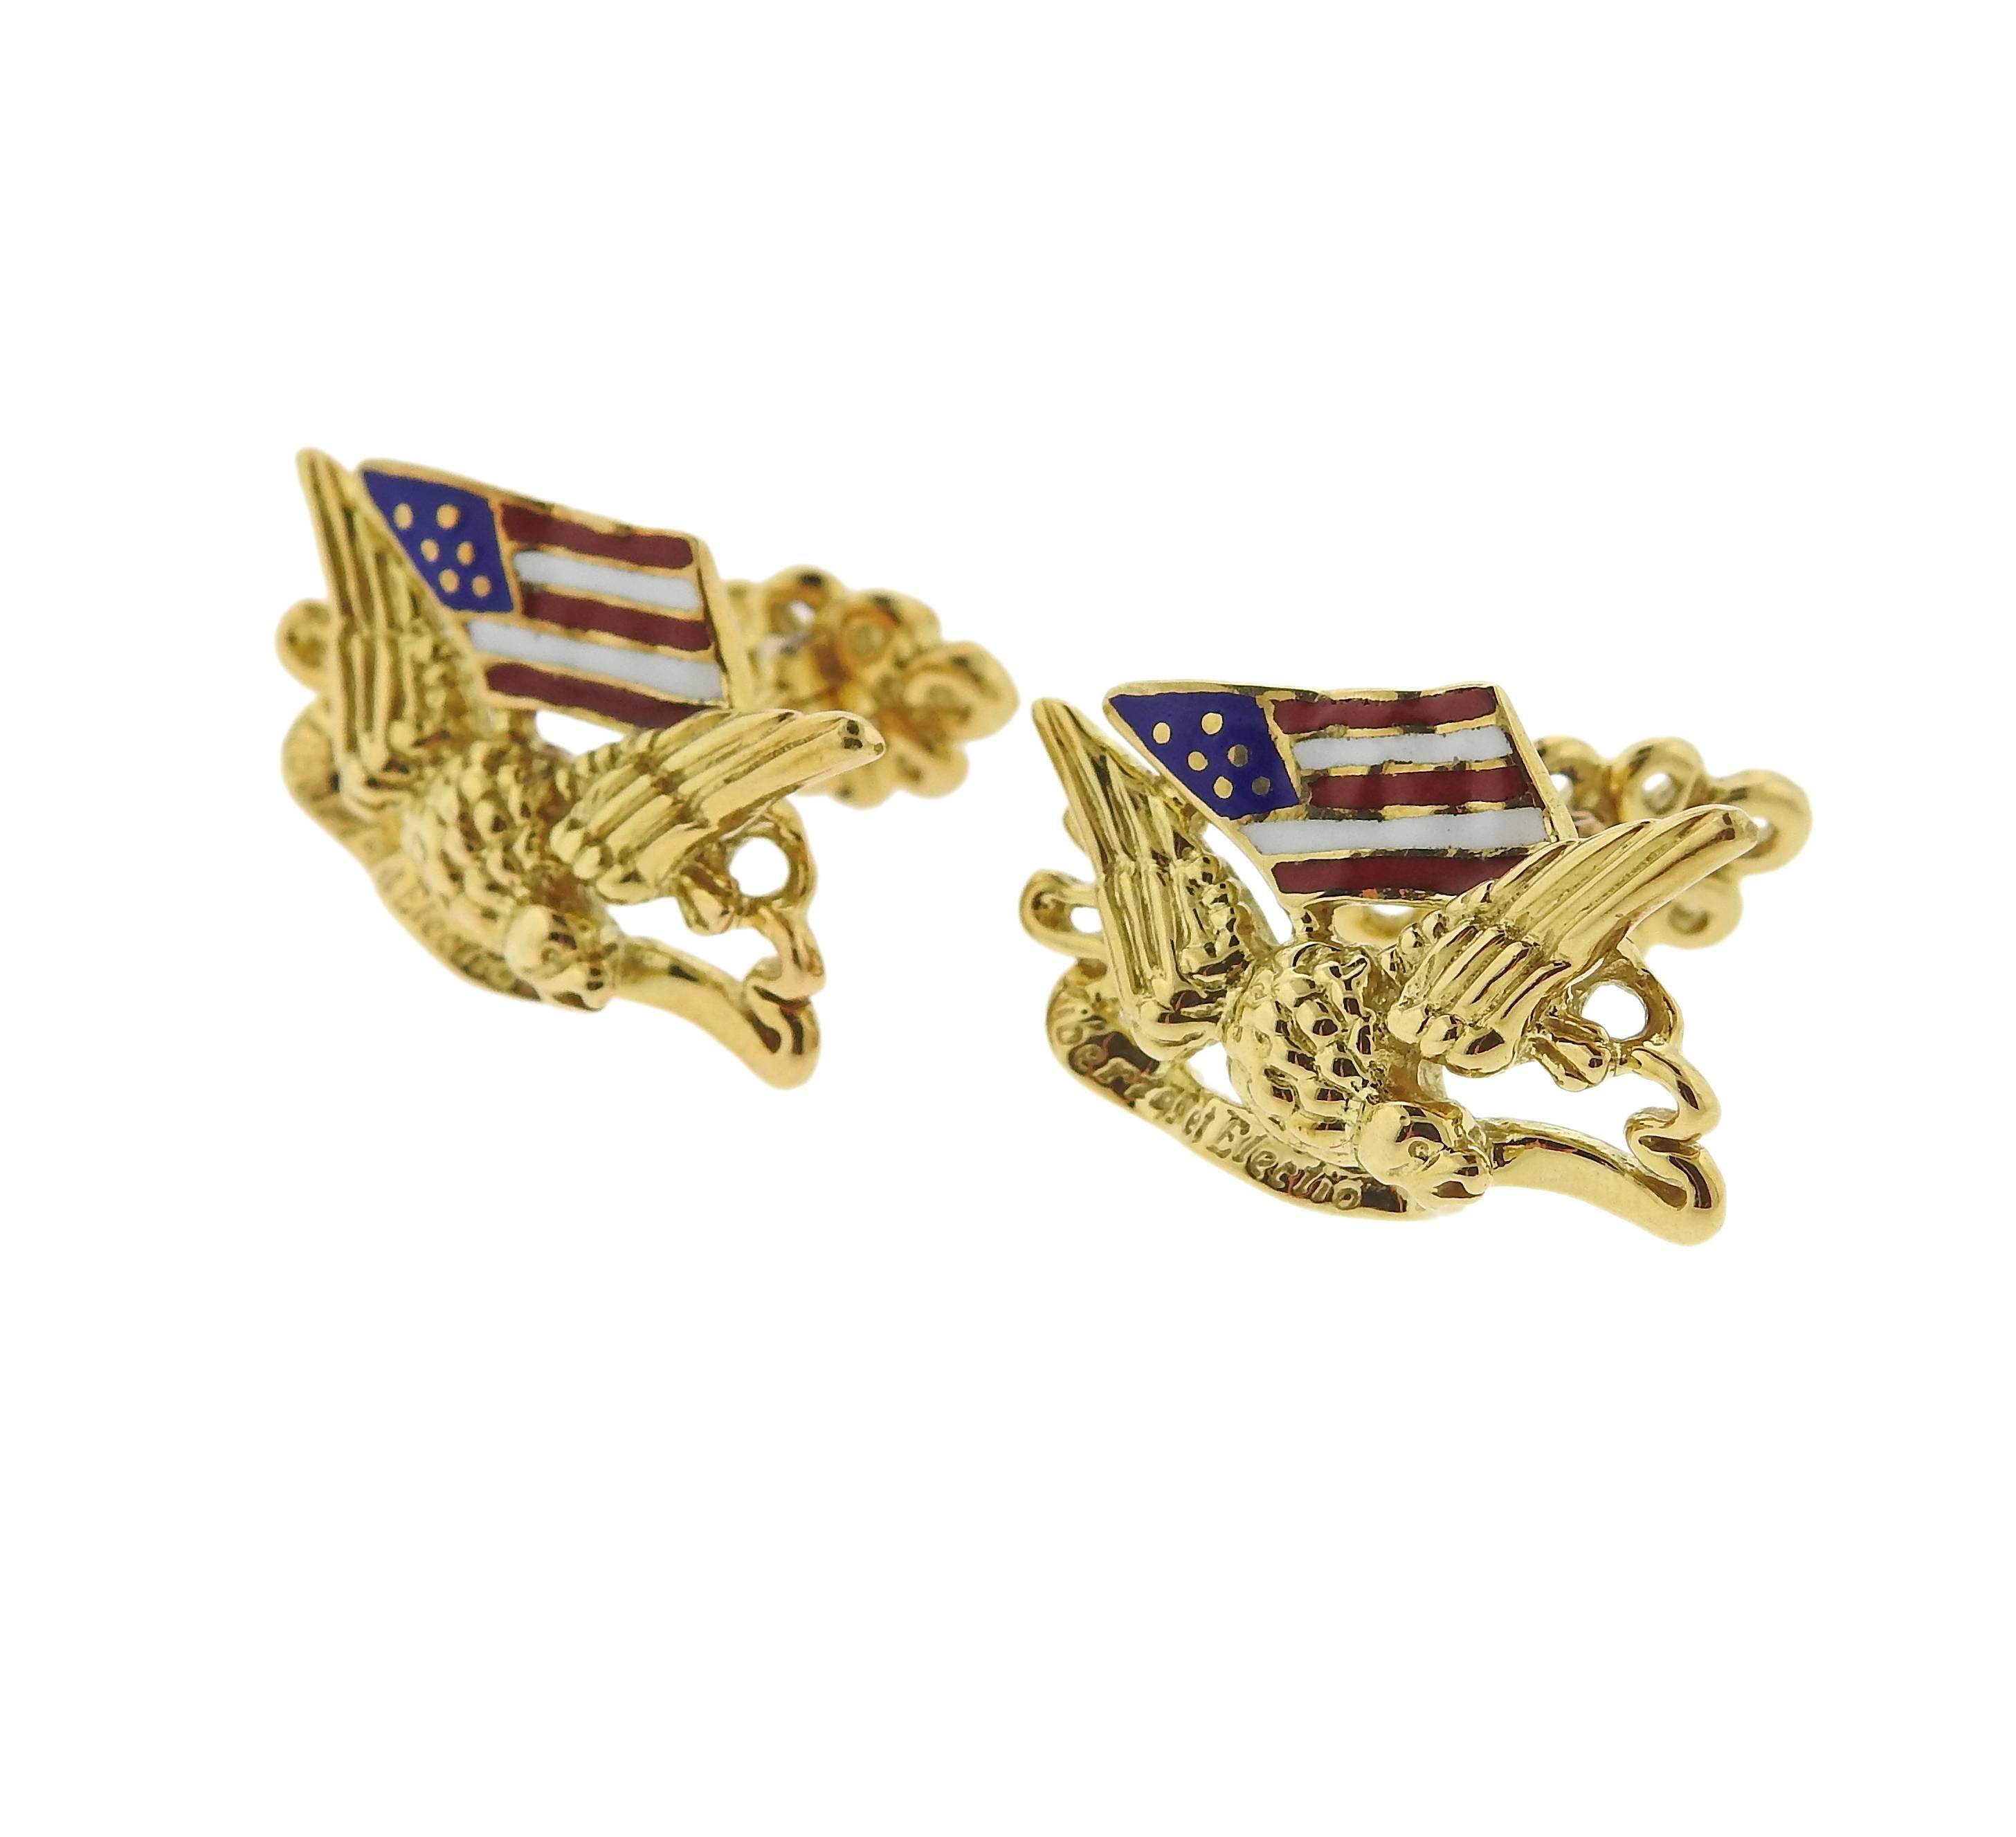 Pair of 18k gold cufflinks, crafted by Haume,  depicting Freedom Eagle with enamel American flag. Cufflink top measures 26mm x 17mm. Marked; Haume 18k. Weight of the set - 20 grams.